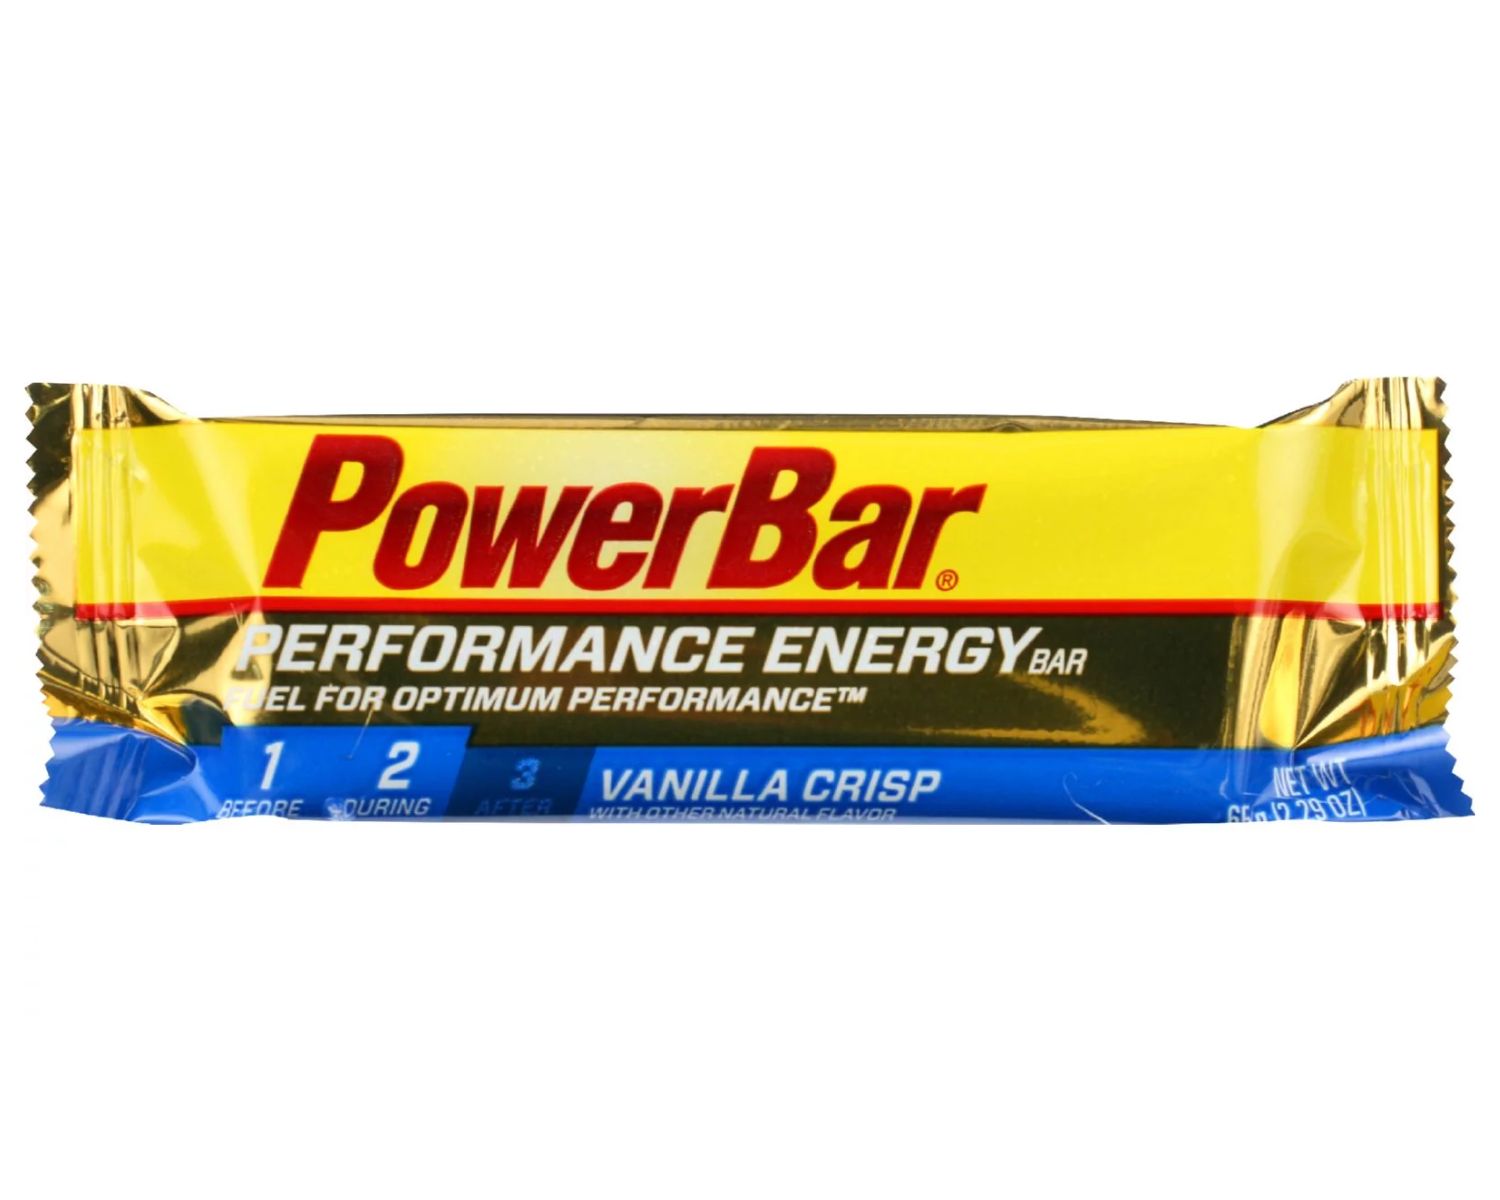 20-power-bar-nutritional-facts